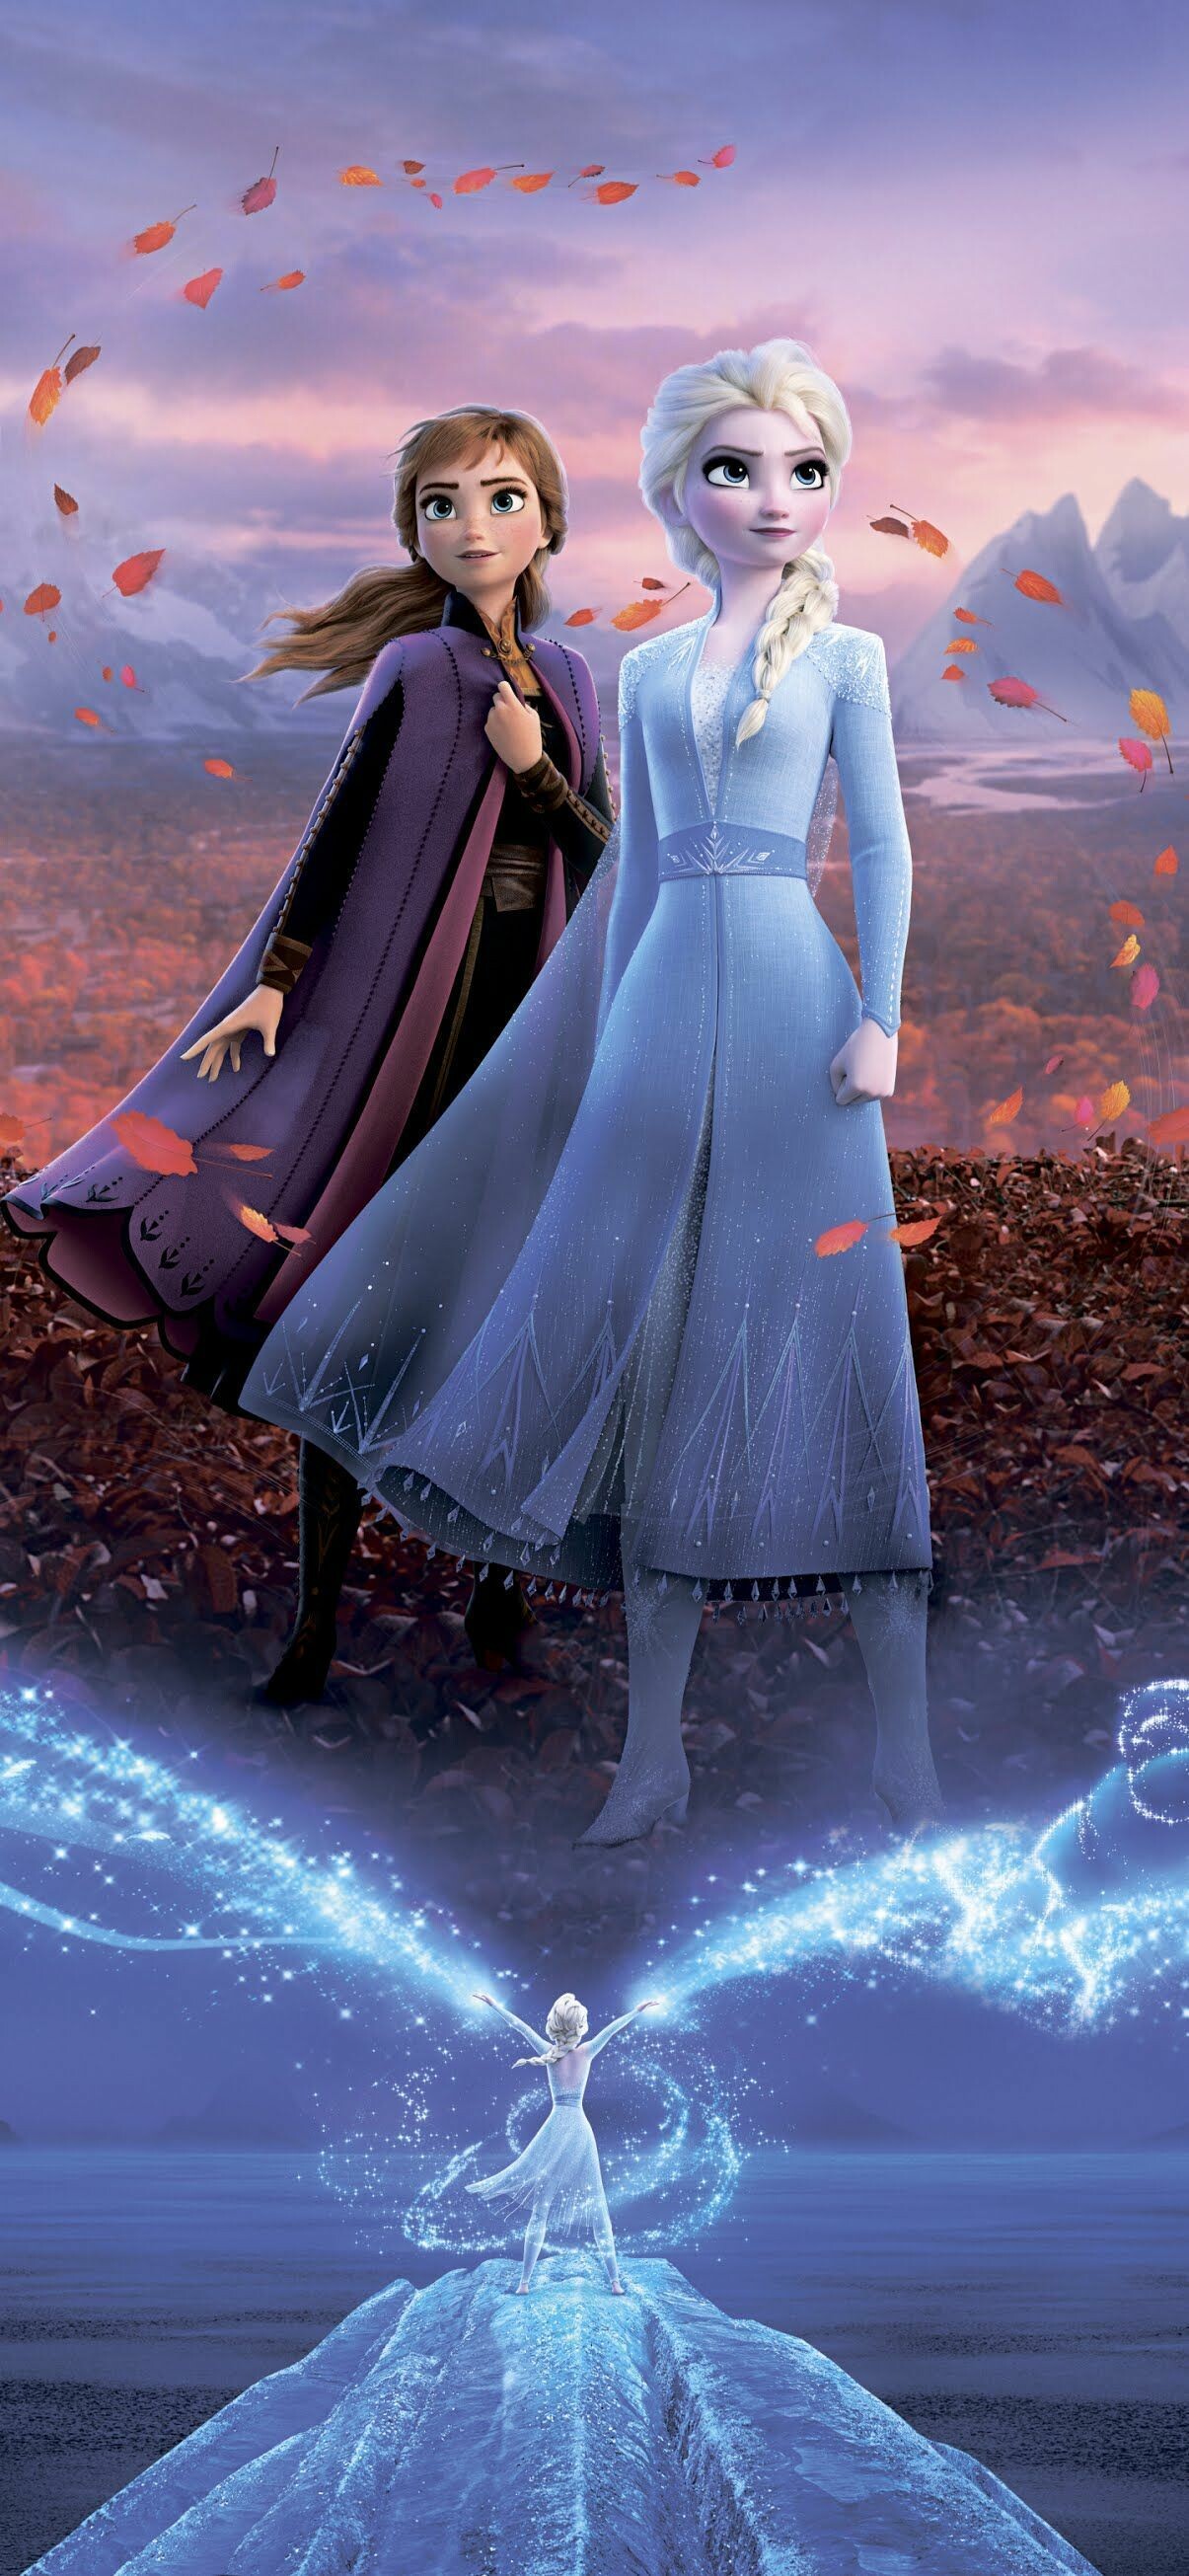 Frozen: Three years after her coronation, Elsa celebrates autumn in the kingdom with Anna, the snowman Olaf, the iceman Kristoff, and Kristoff's reindeer Sven, One night, Elsa hears a mysterious voice calling her. 1210x2610 HD Background.